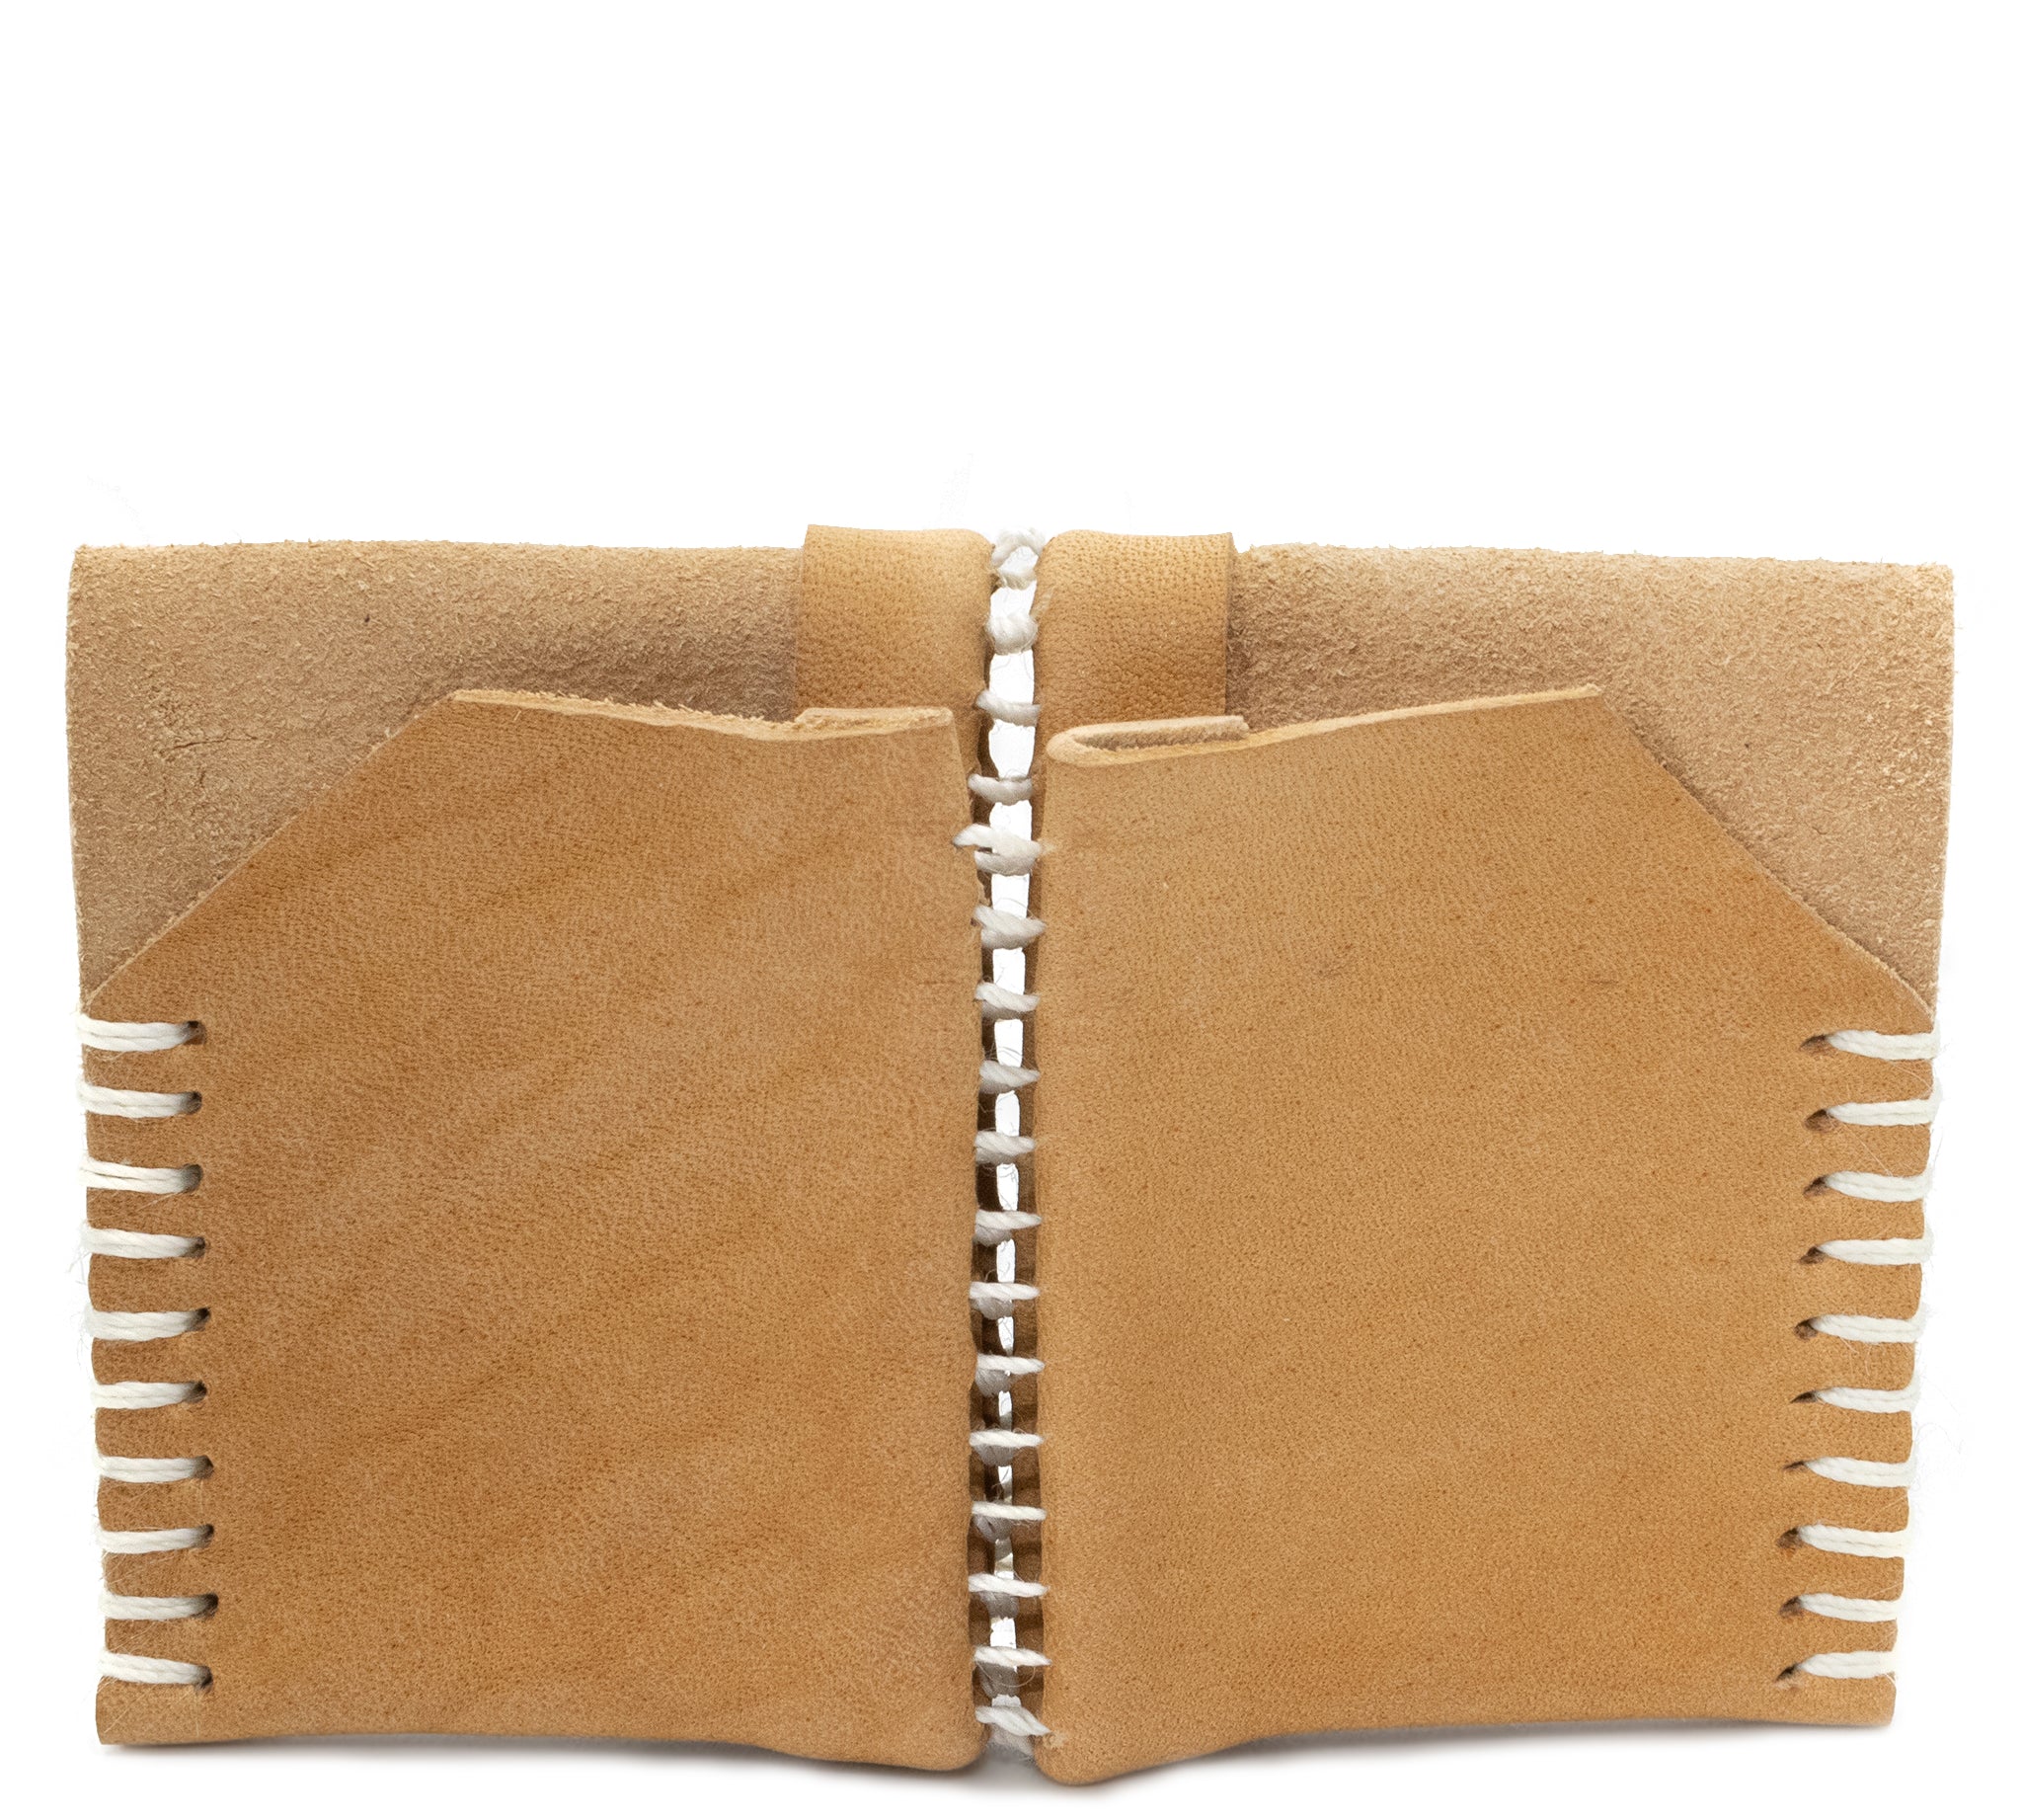 natural horse culatta leather cardholder from atelier skn